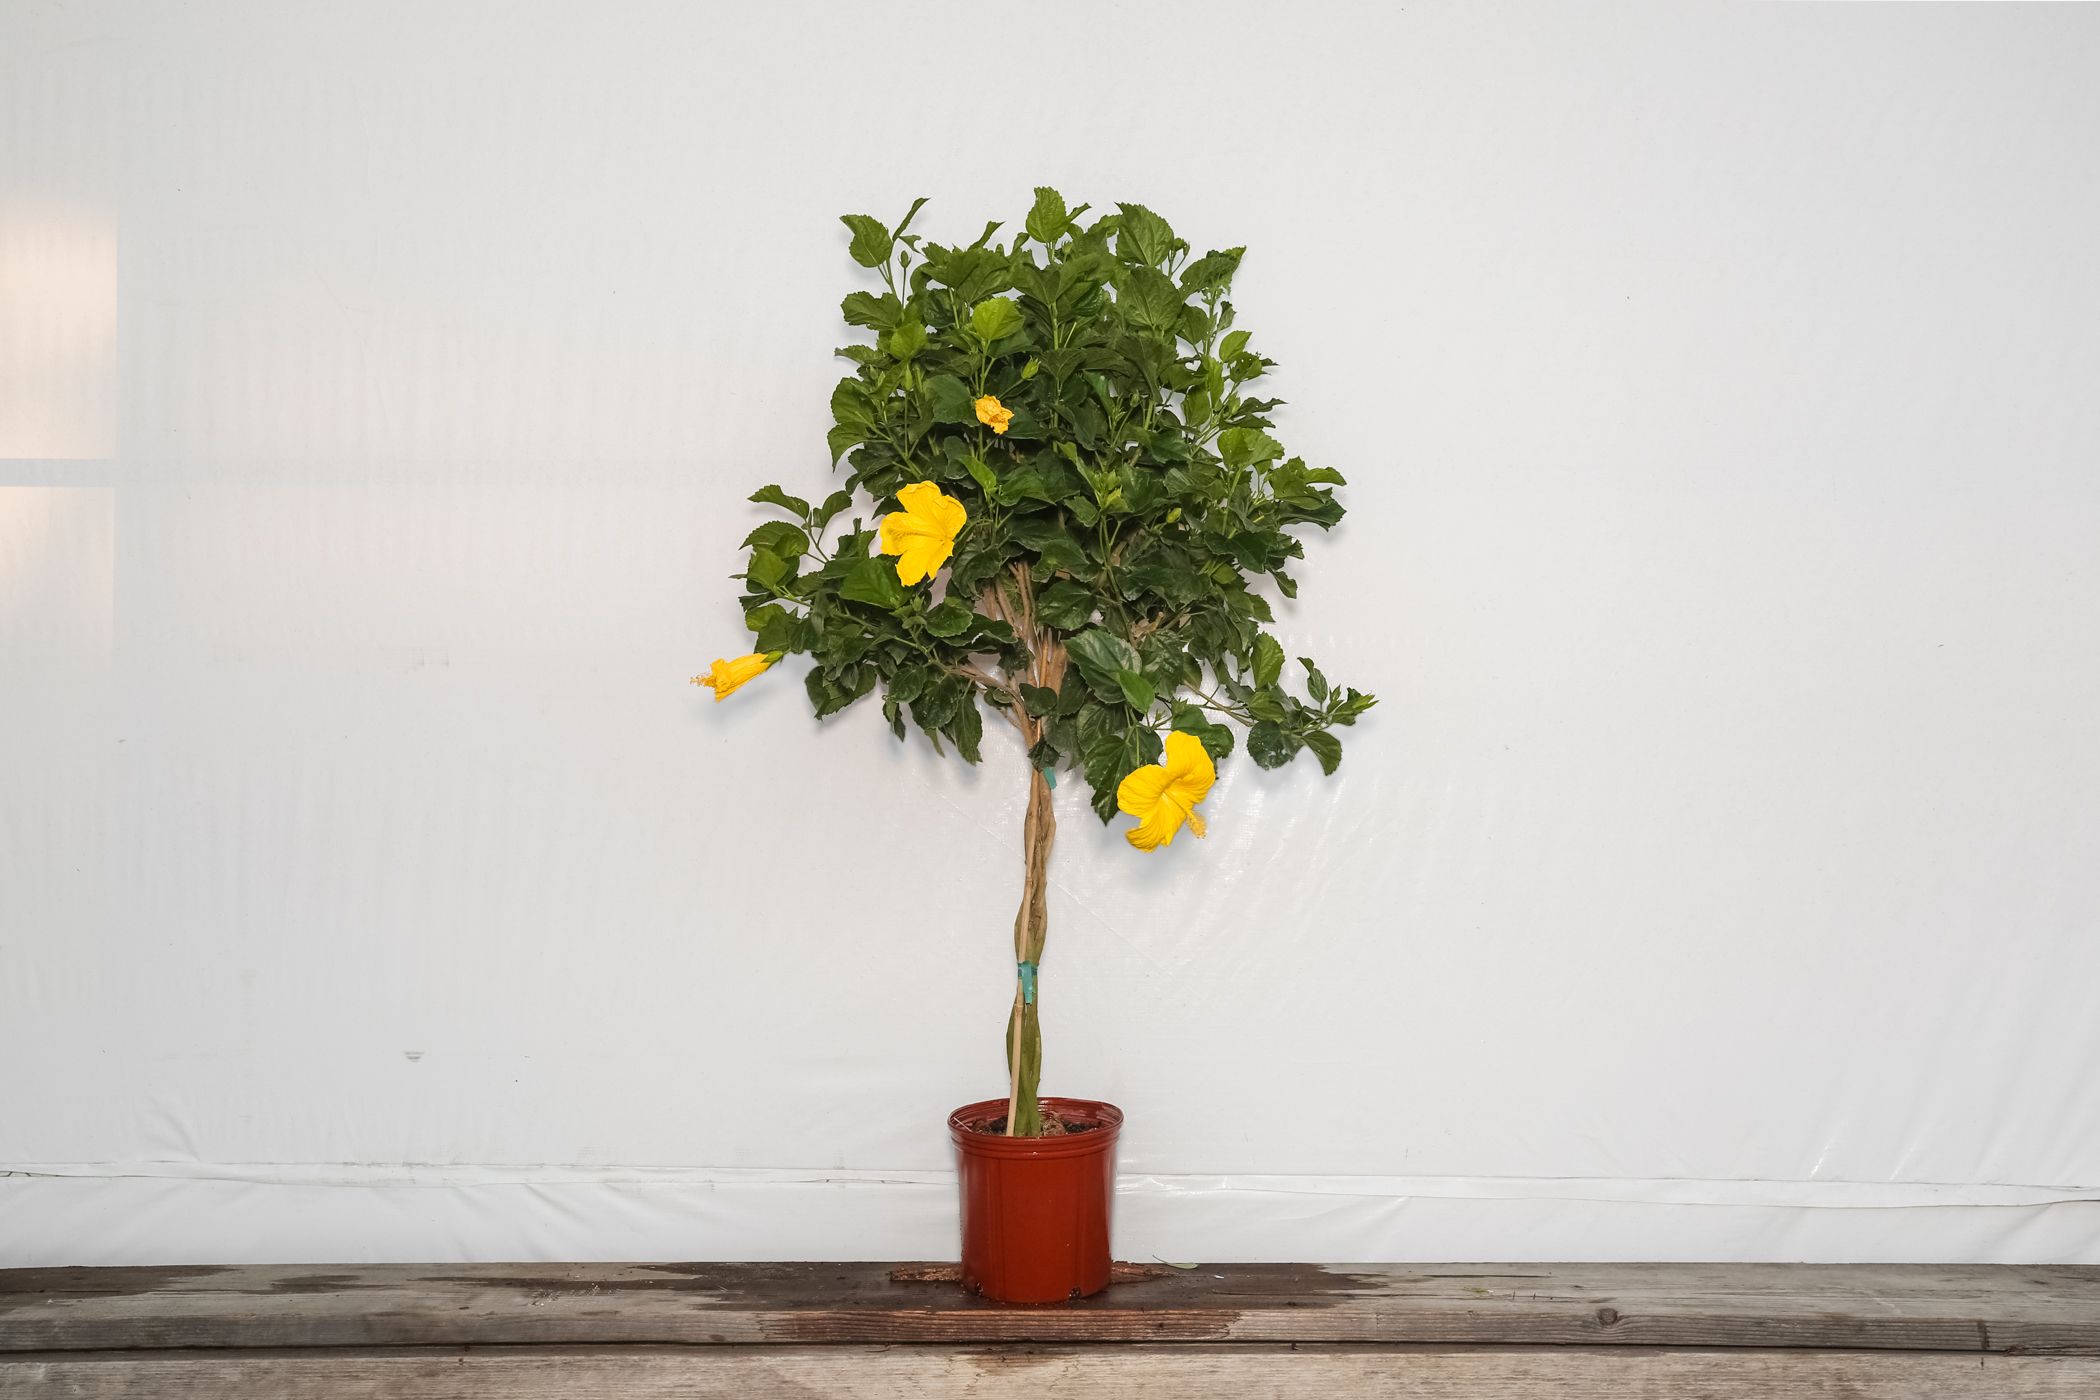 Braided Hibiscus Tree Yellow Fort Myers 3 Gallon